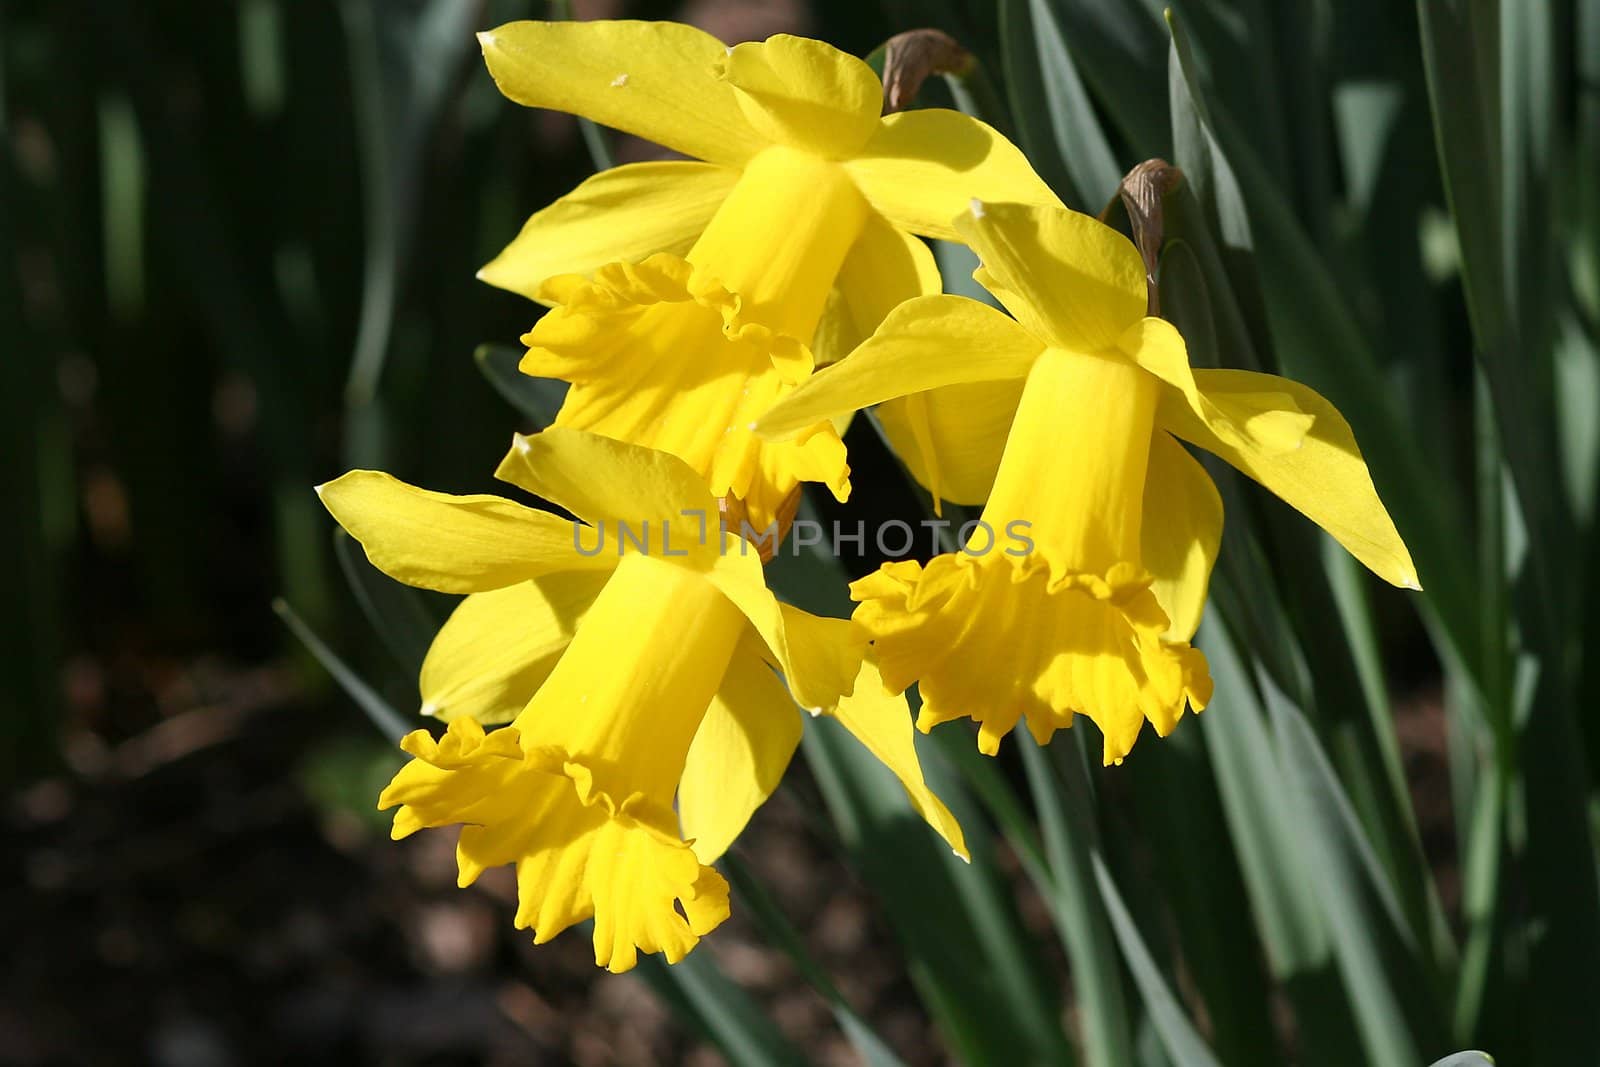 Daffodil by monner